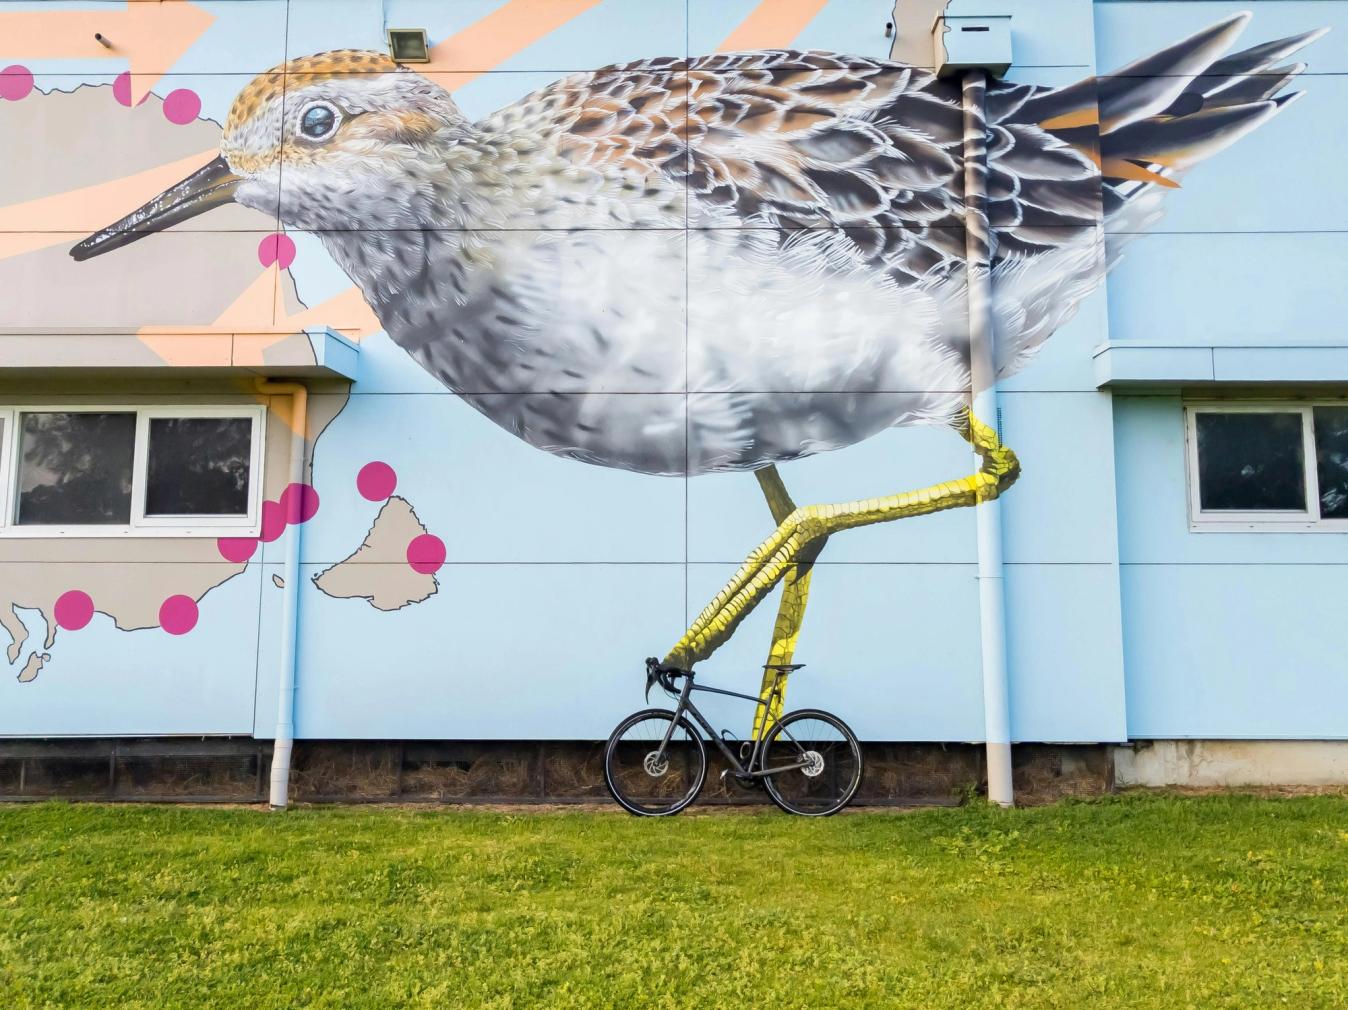 This submission was aptly labelled as a 'Giant bird atop a Giant bike'